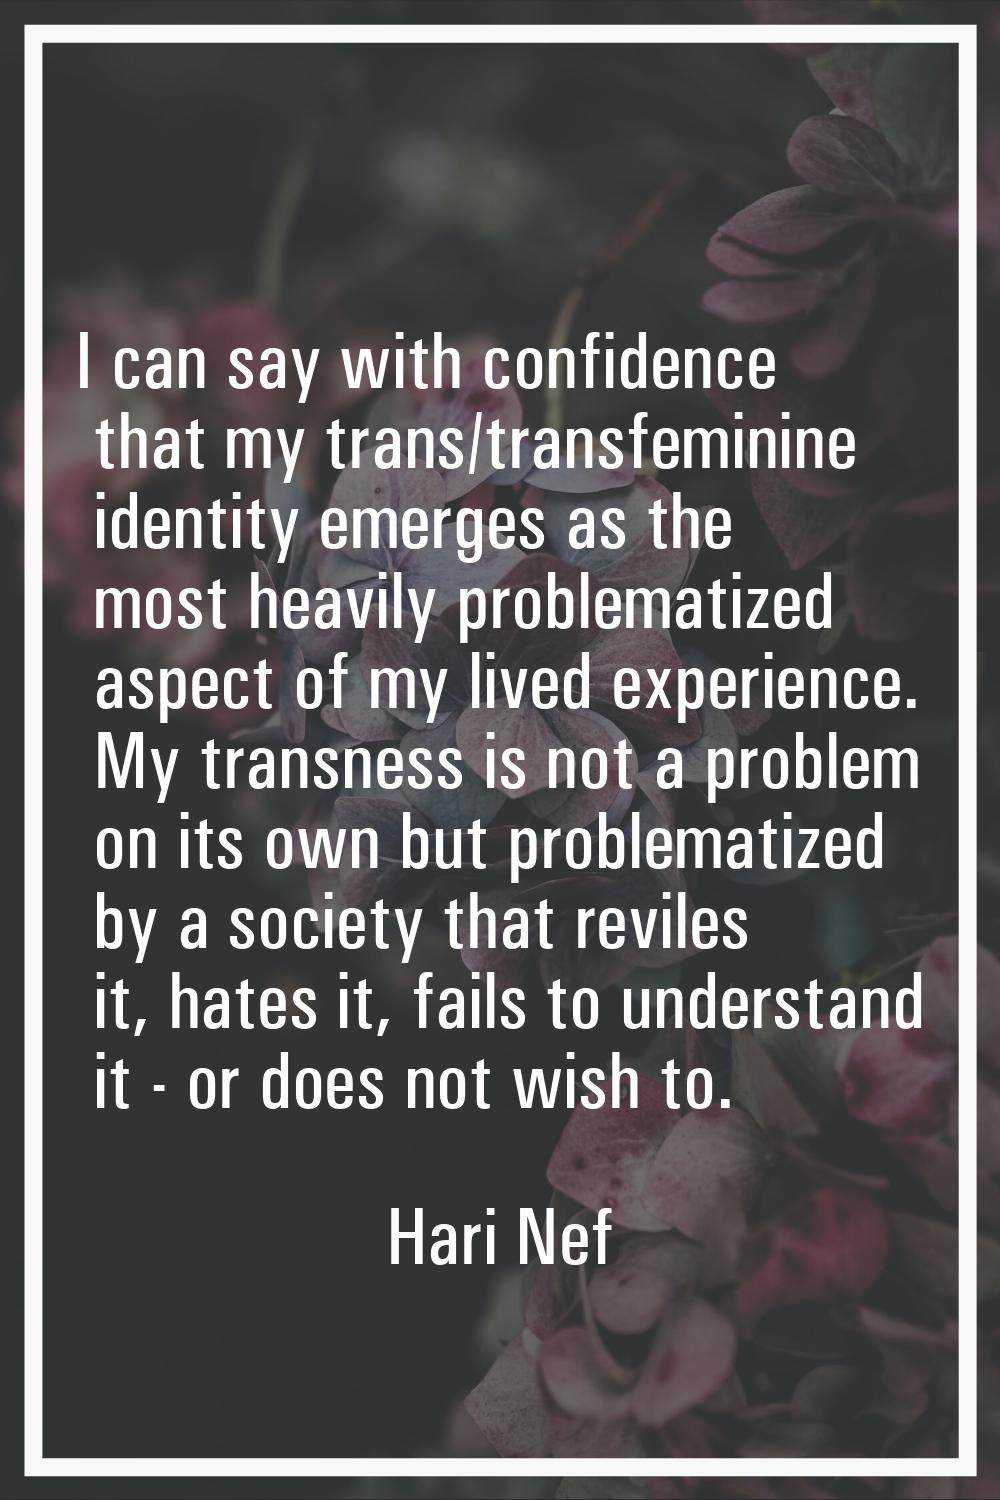 I can say with confidence that my trans/transfeminine identity emerges as the most heavily problema